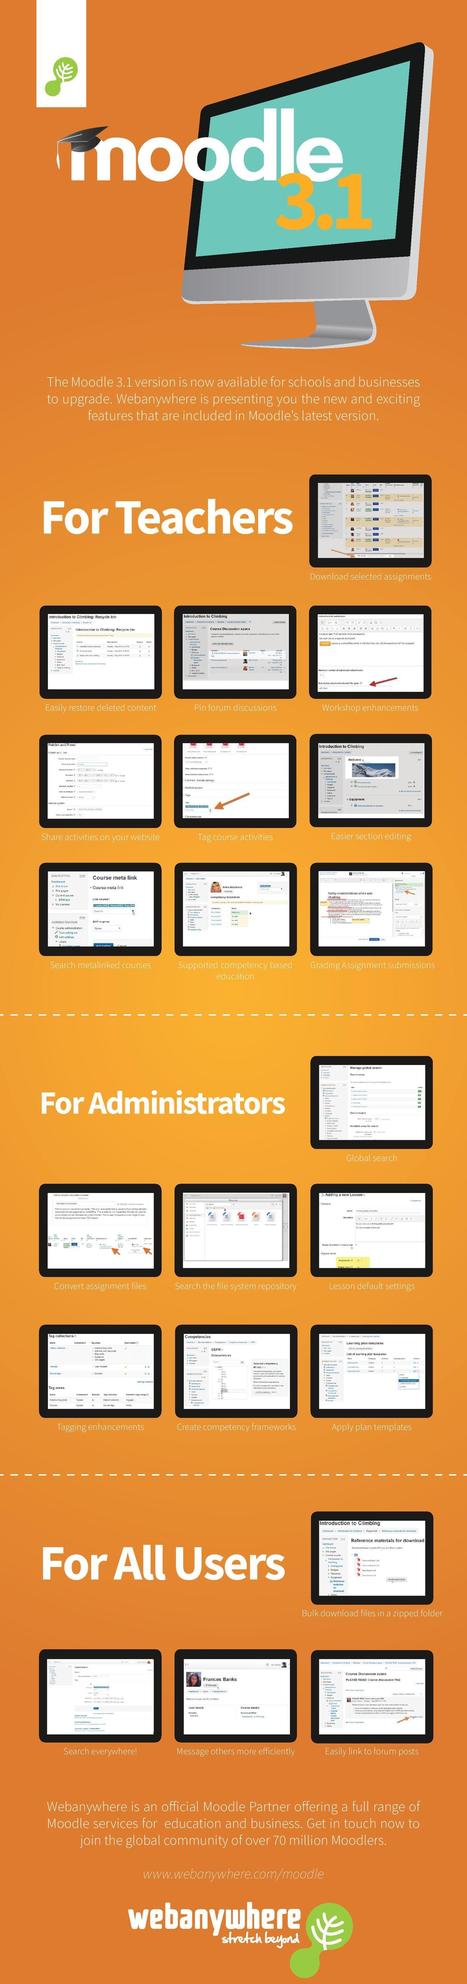 Moodle 3.1 New Features Infographic | moodle3 | Scoop.it